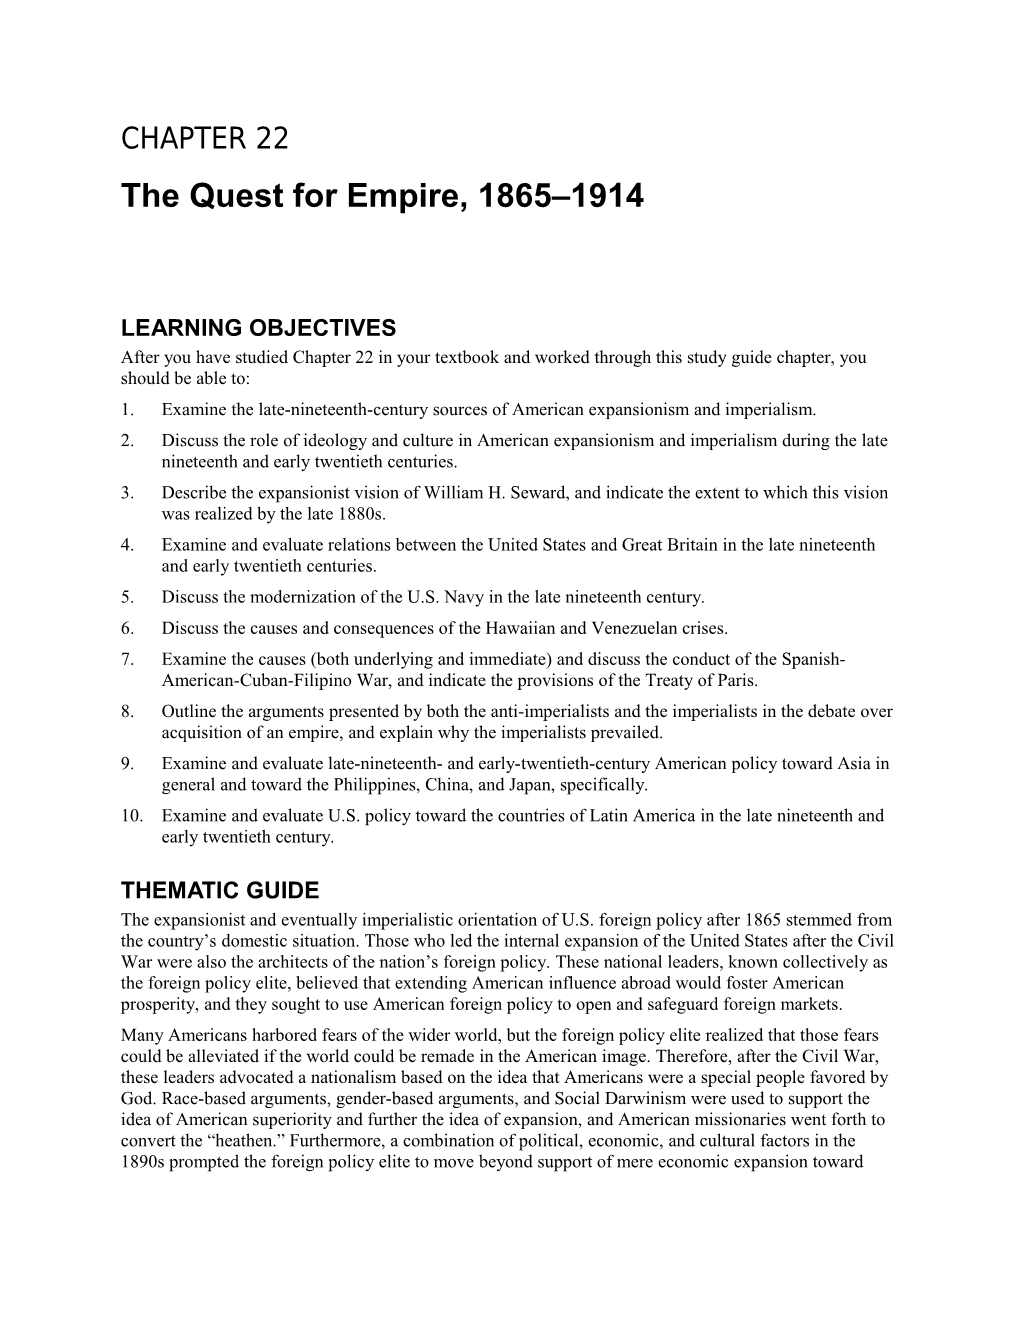 The Quest for Empire, 1865 1914